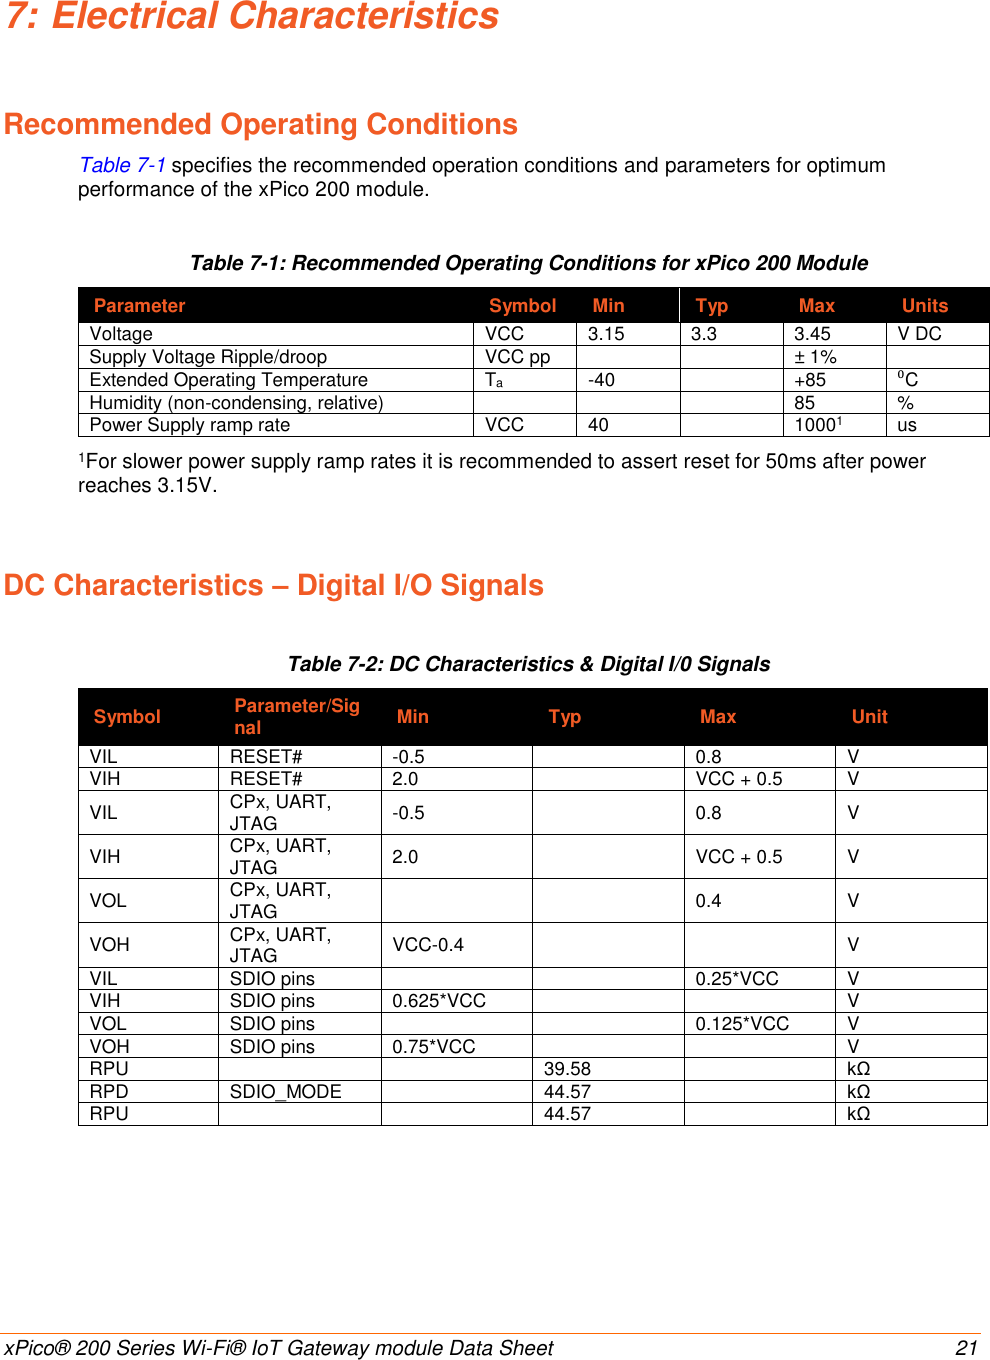    xPico® 200 Series Wi-Fi® IoT Gateway module Data Sheet  21 7: Electrical Characteristics Recommended Operating Conditions Table 7-1 specifies the recommended operation conditions and parameters for optimum performance of the xPico 200 module.  Table 7-1: Recommended Operating Conditions for xPico 200 Module Parameter Symbol Min Typ Max Units Voltage VCC 3.15 3.3 3.45 V DC Supply Voltage Ripple/droop VCC pp   ± 1%  Extended Operating Temperature  Ta -40  +85 ⁰C Humidity (non-condensing, relative)    85 % Power Supply ramp rate VCC 40  10001 us 1For slower power supply ramp rates it is recommended to assert reset for 50ms after power reaches 3.15V. DC Characteristics – Digital I/O Signals Table 7-2: DC Characteristics &amp; Digital I/0 Signals Symbol Parameter/Signal Min Typ Max Unit VIL RESET# -0.5  0.8 V VIH RESET# 2.0  VCC + 0.5 V VIL CPx, UART, JTAG -0.5  0.8 V VIH CPx, UART, JTAG 2.0  VCC + 0.5 V VOL CPx, UART, JTAG   0.4 V VOH CPx, UART, JTAG VCC-0.4   V VIL SDIO pins   0.25*VCC V VIH SDIO pins 0.625*VCC   V VOL SDIO pins   0.125*VCC V VOH SDIO pins 0.75*VCC   V RPU   39.58  kΩ RPD SDIO_MODE  44.57  kΩ RPU   44.57  kΩ    